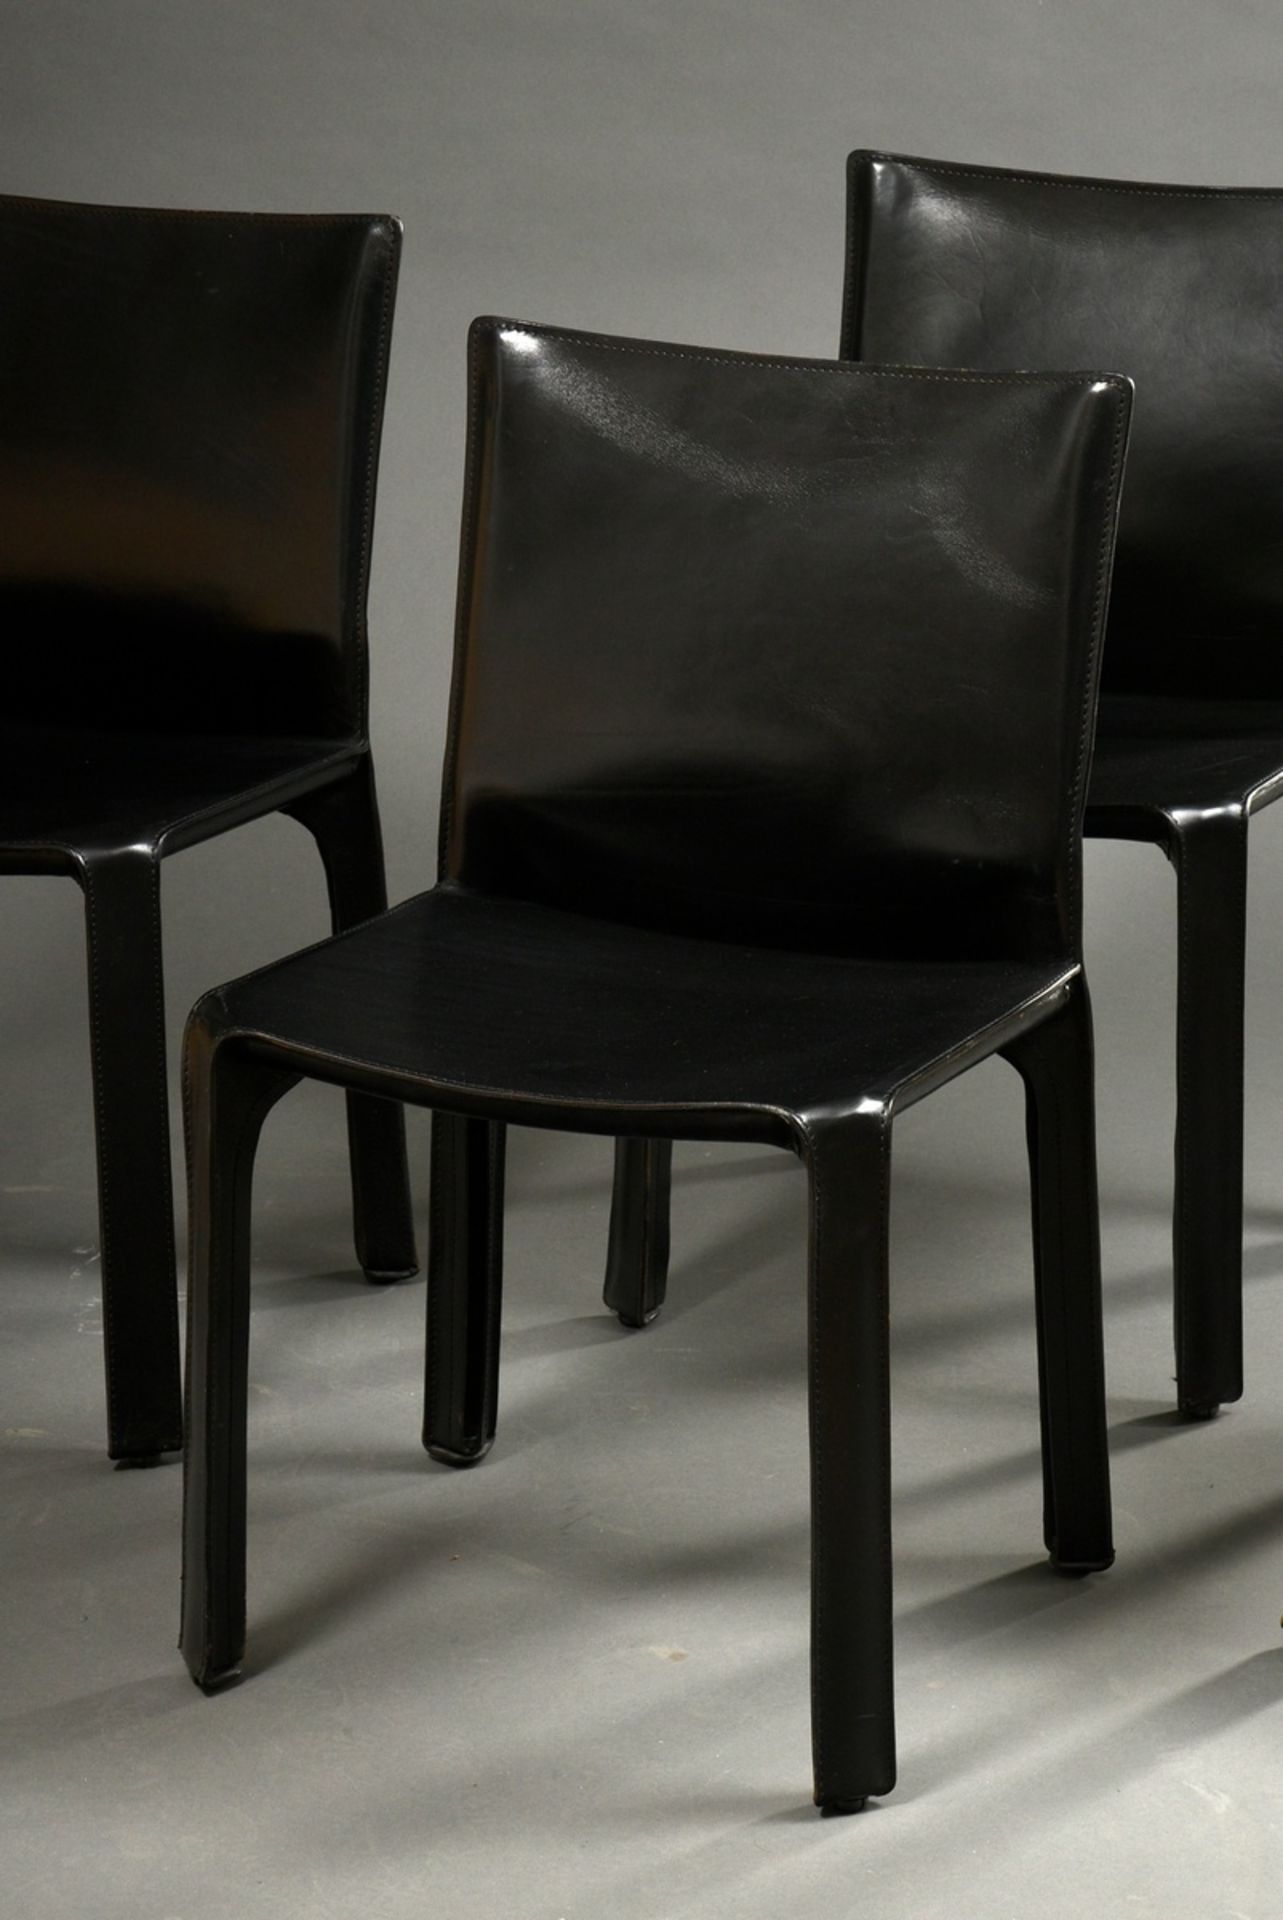 4 Cassina CAB 412 chairs, lacquered steel frame with black core leather upholstery, designed by Mar - Image 4 of 7